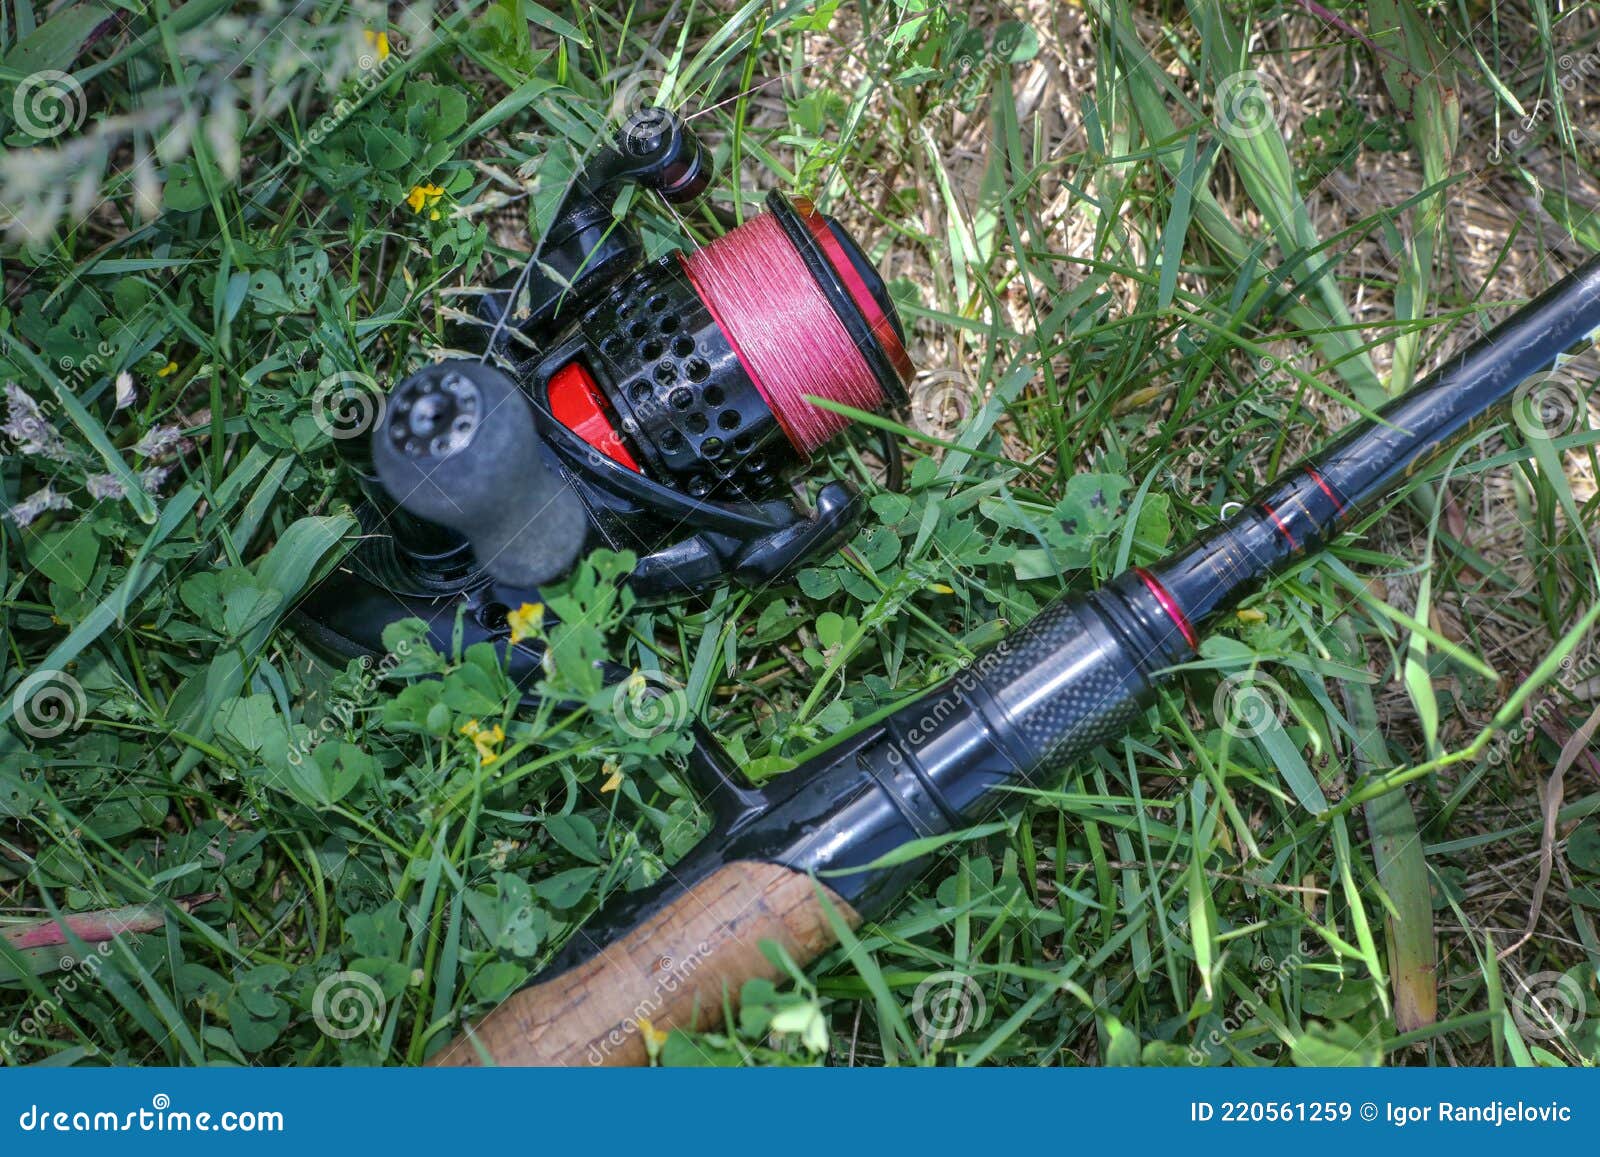 Fishing Reel with Red Fishing Line on the Grass Stock Image